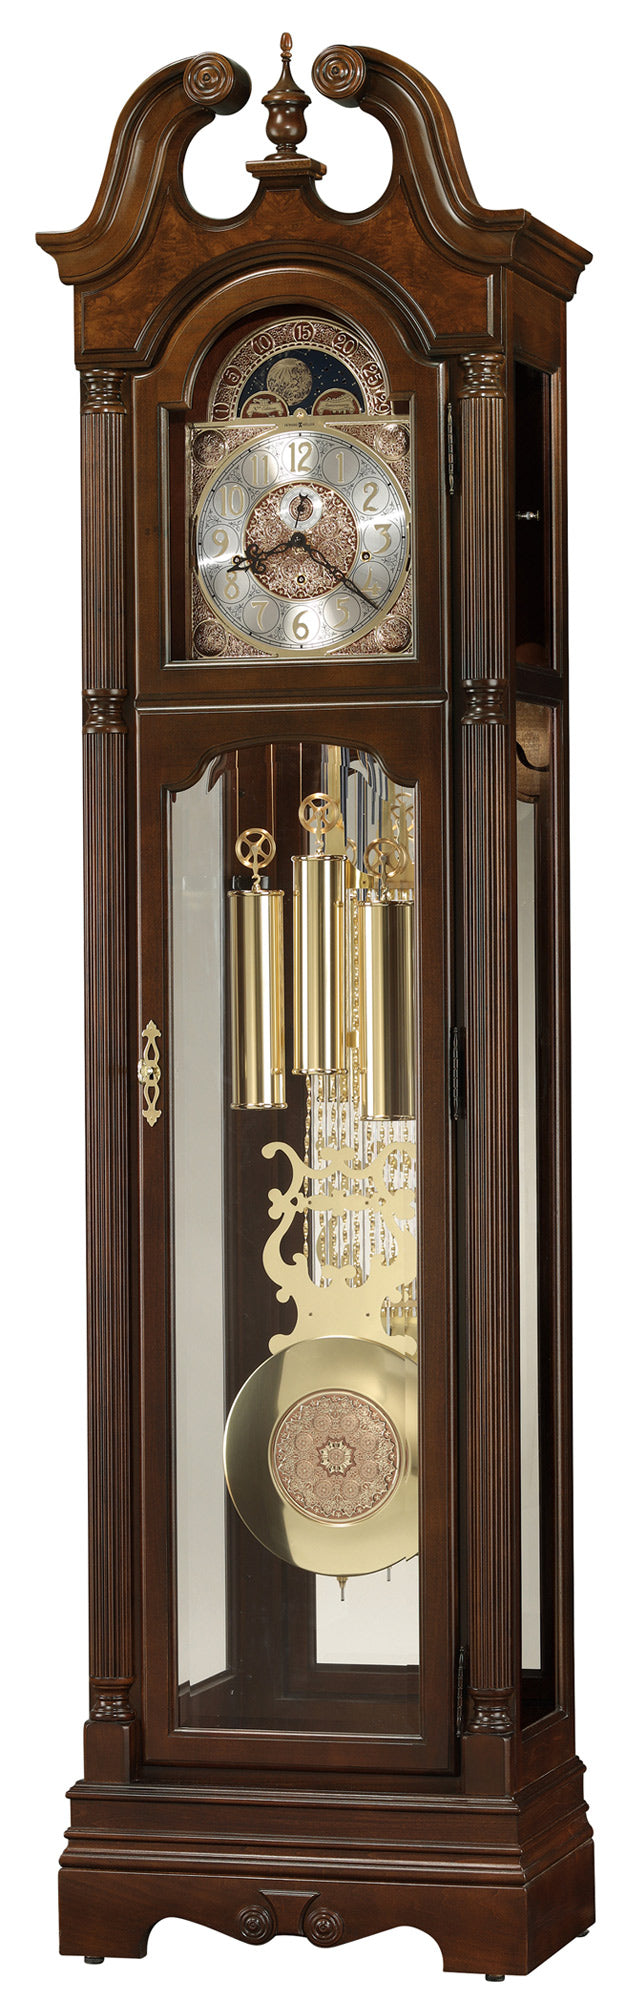 Wellston Grandfather Clock by Howard Miller